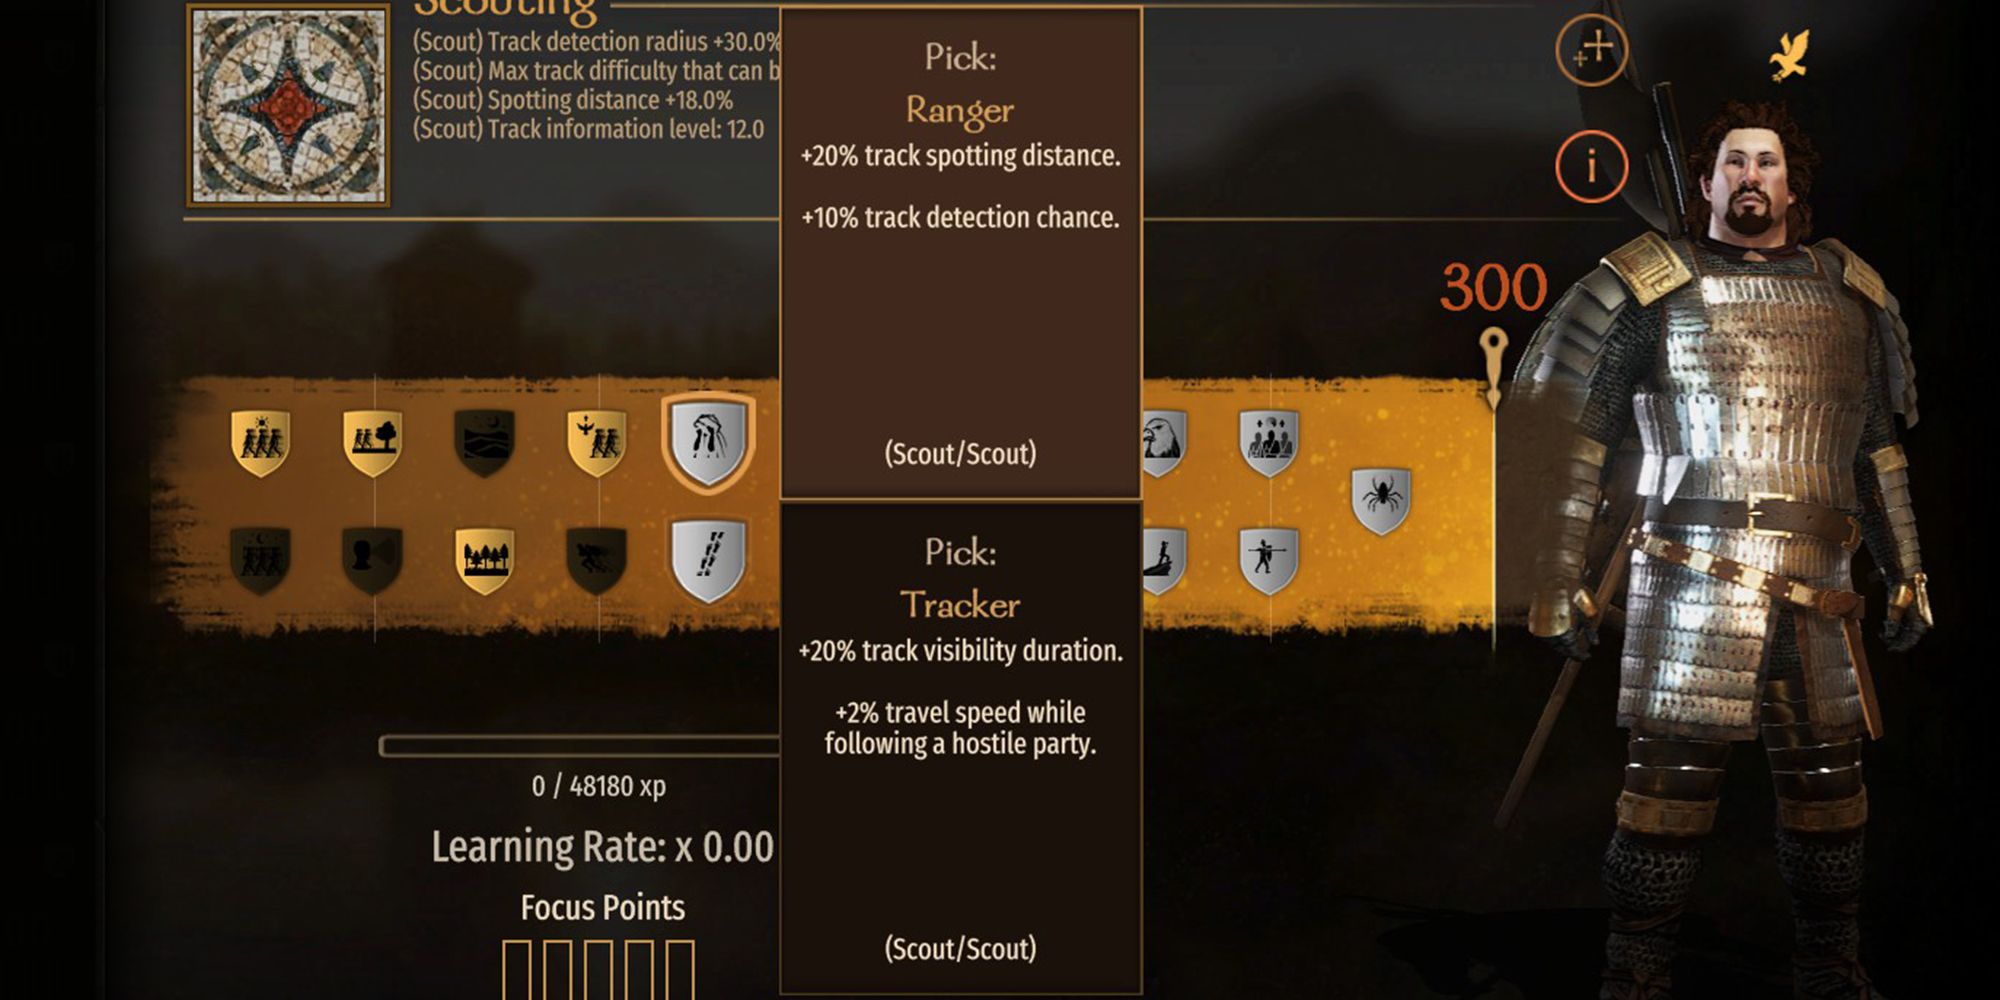 Mount & Blade 2: Bannerlord Tracker Perk: +20% track visibility duration. +2% movement speed while chasing hostile factions.